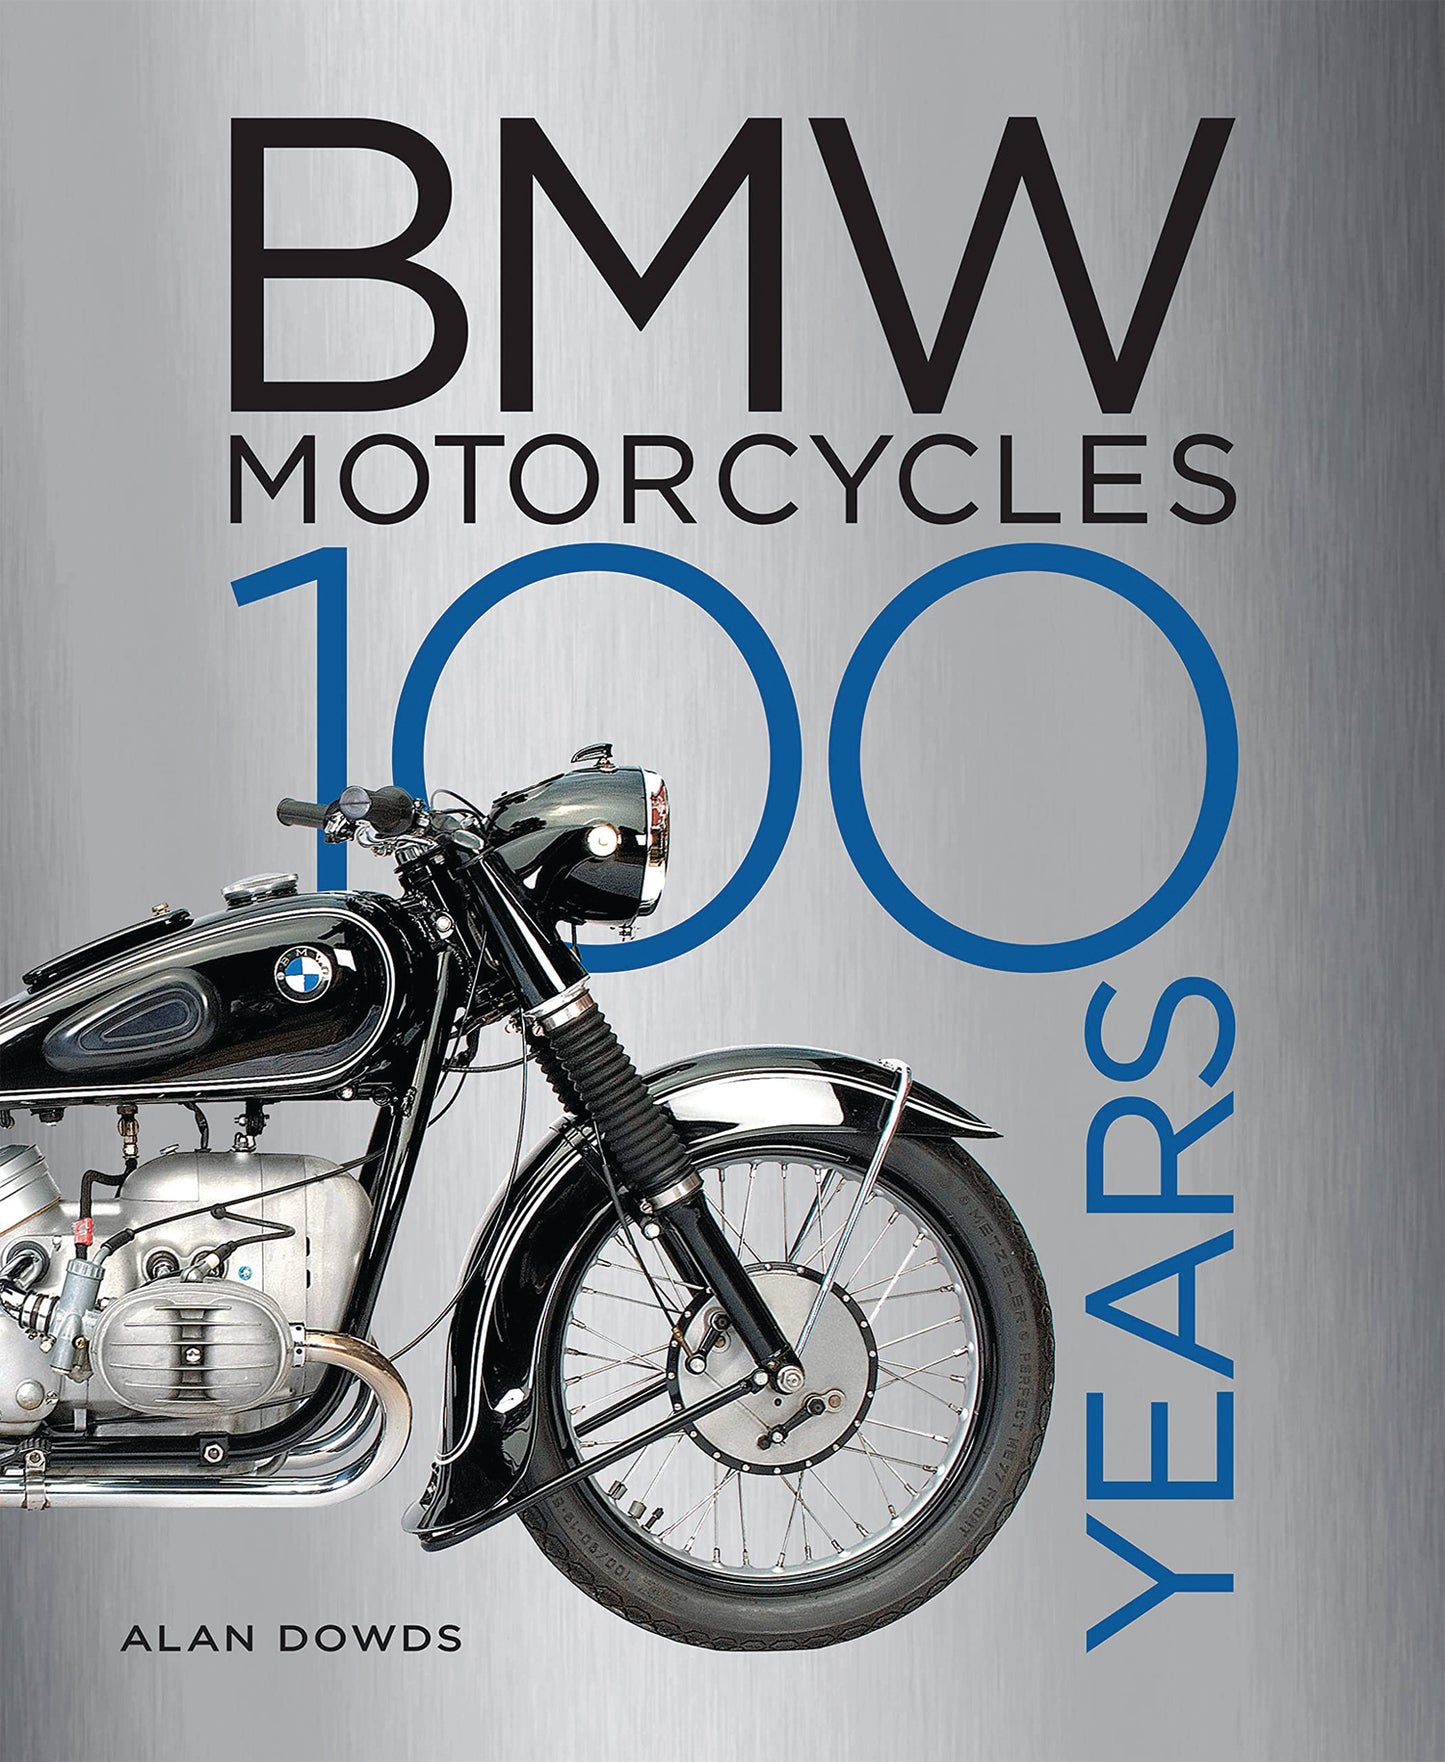 BMW MOTORCYCLES: 100 YEARS